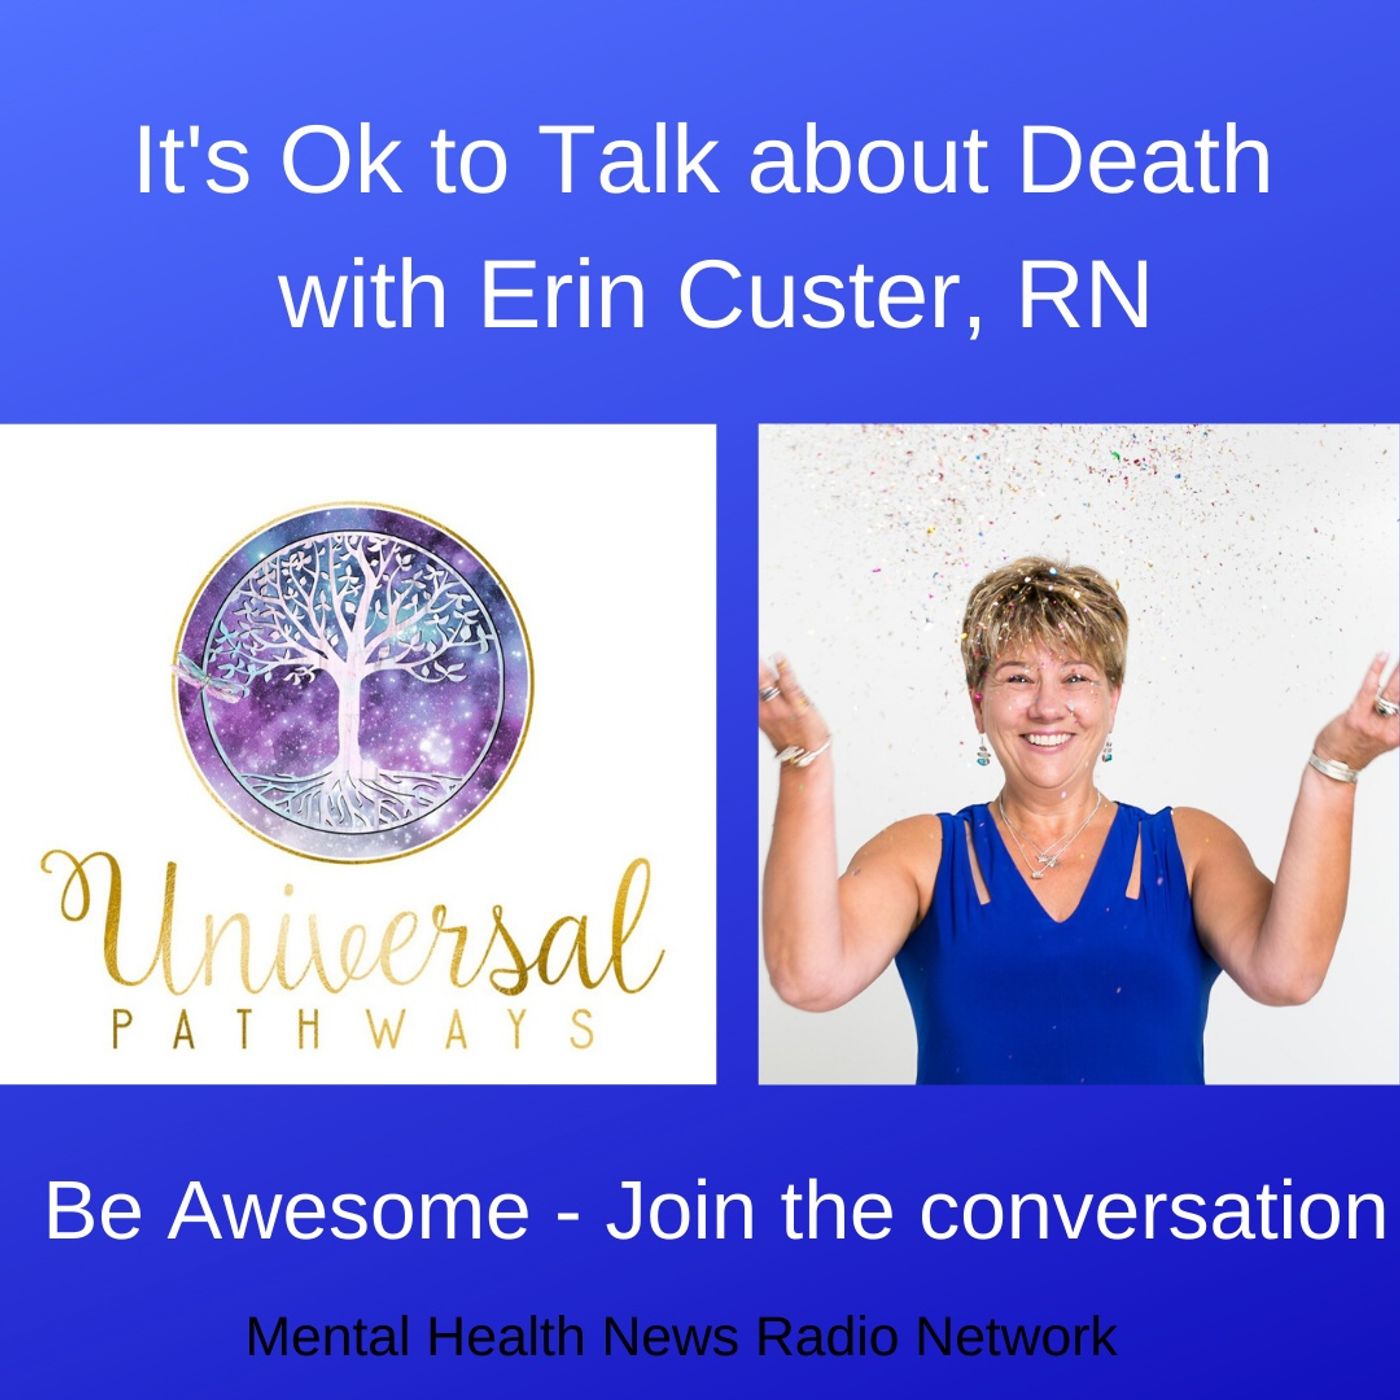 It's Ok to Talk about Death with Erin Custer